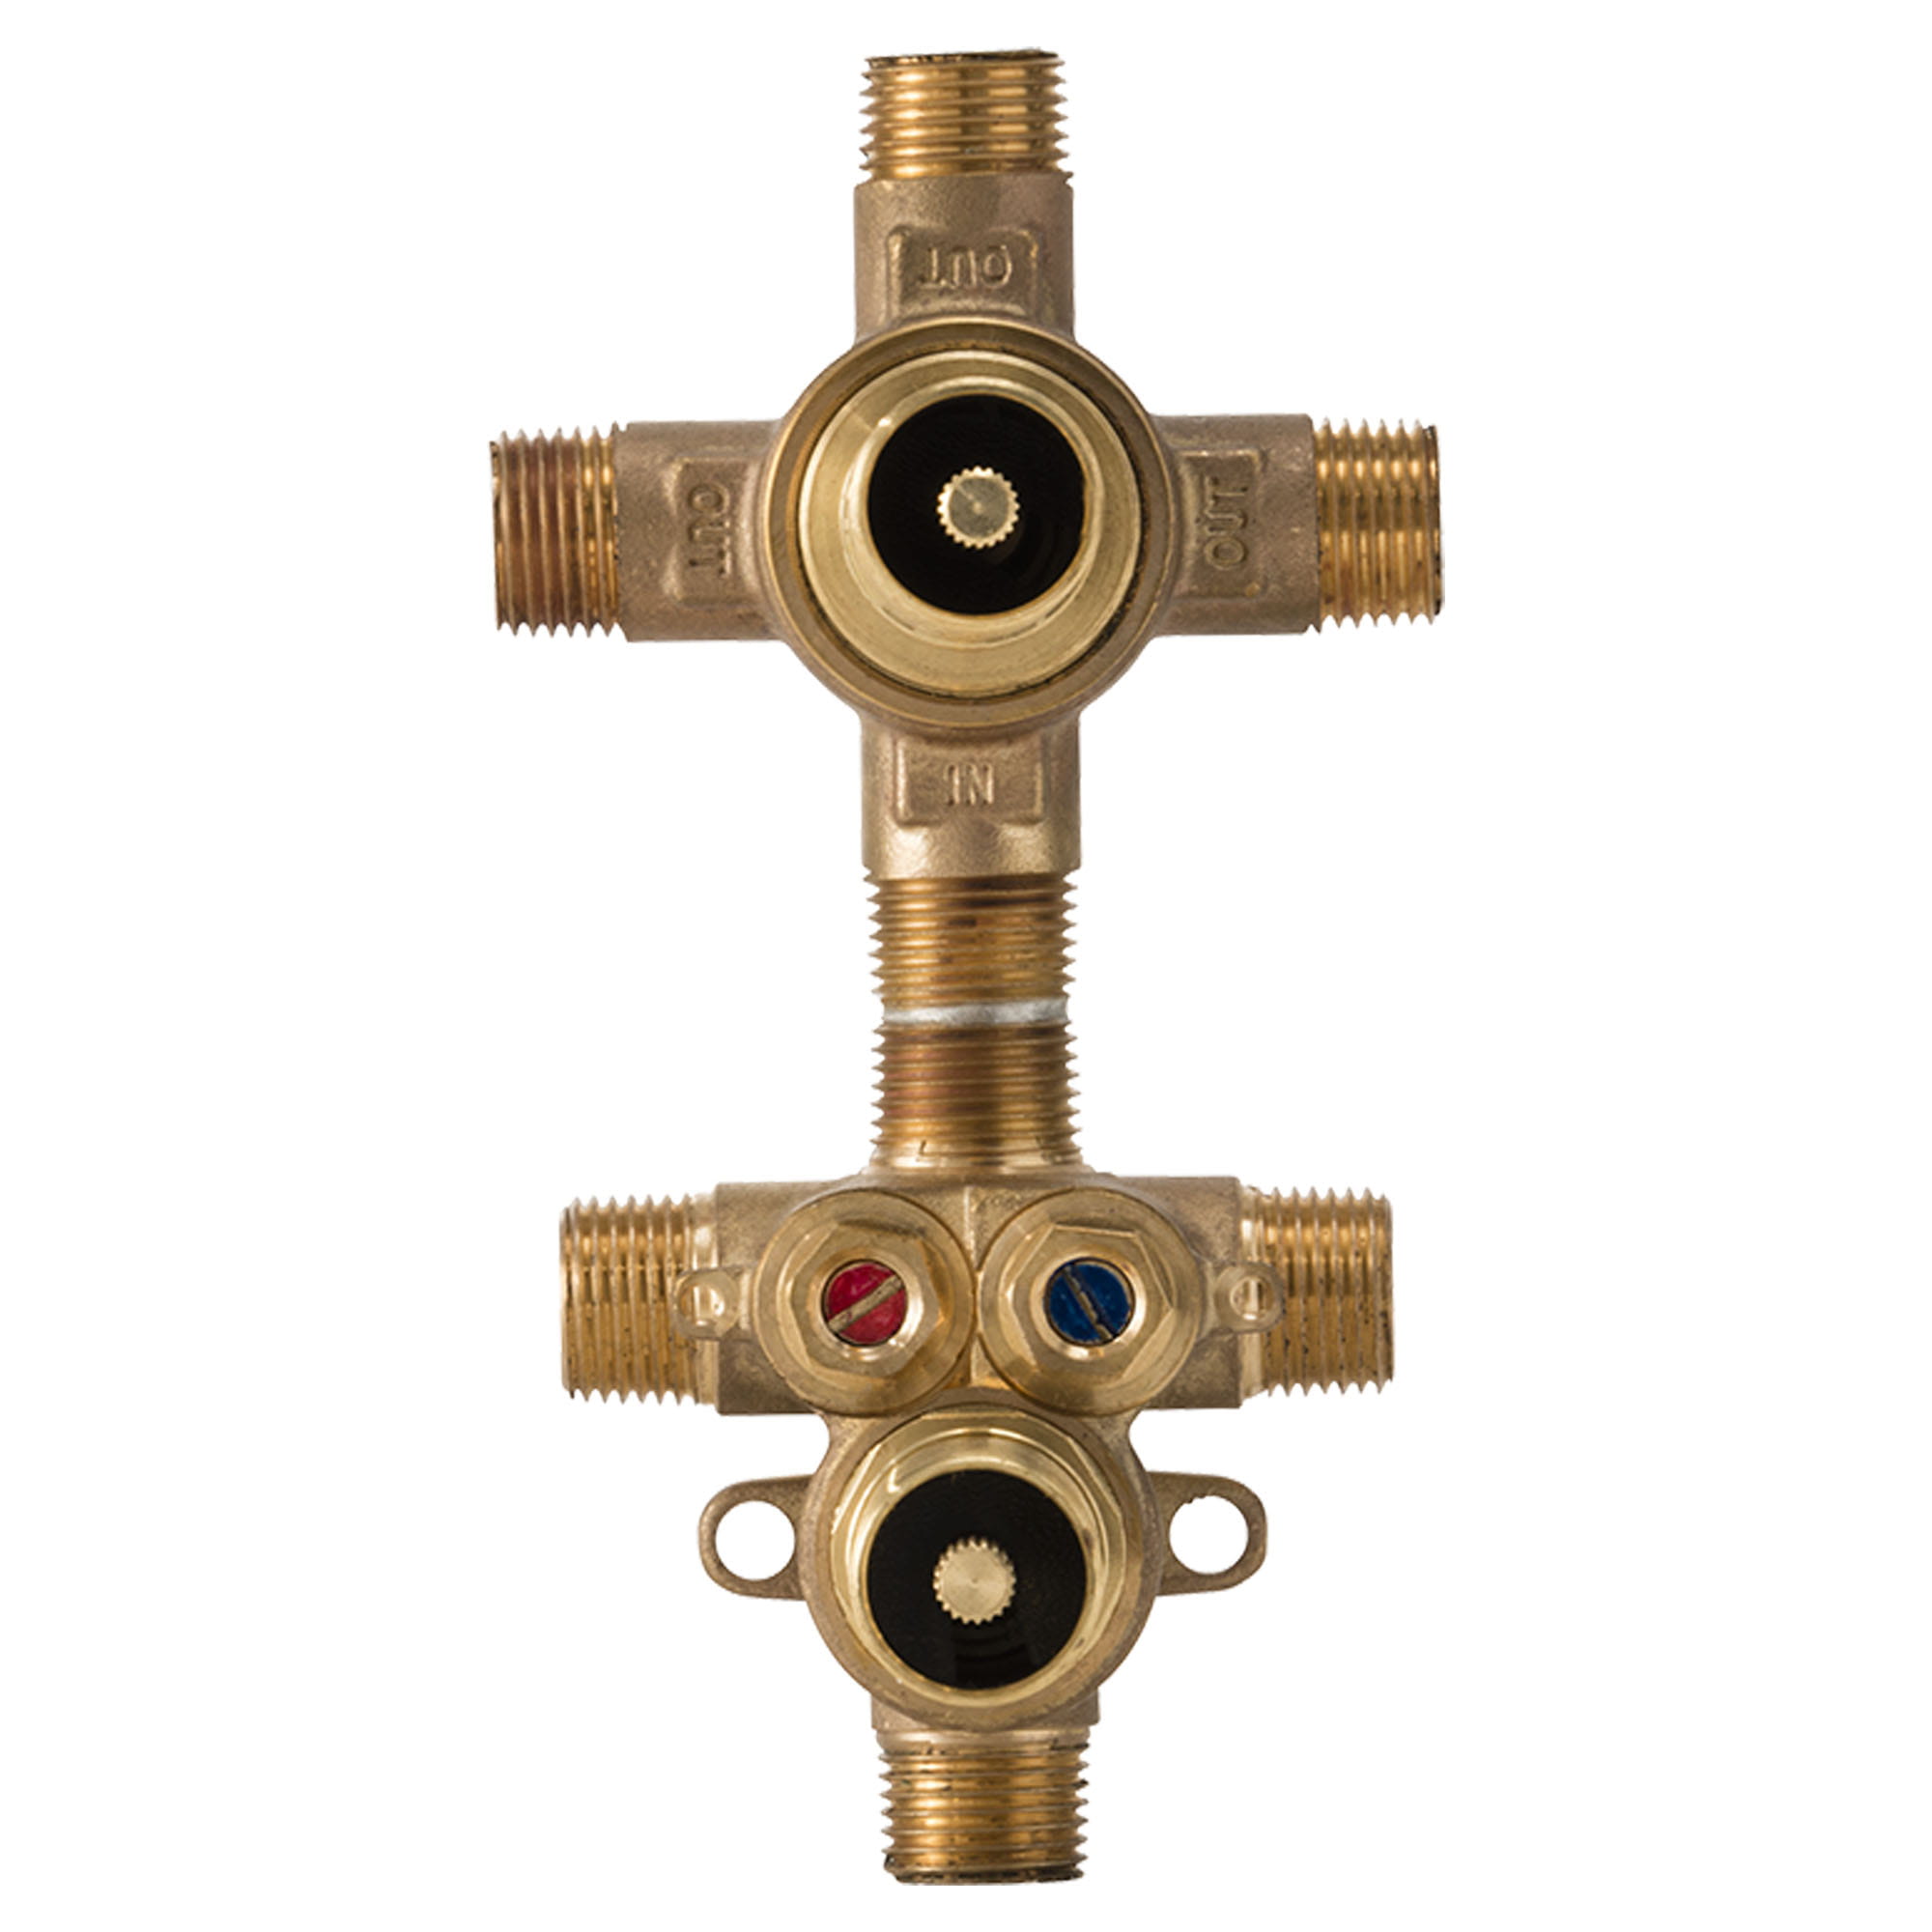 2-Handle Thermostatic Rough Valve with 3-Way Diverter Non-Shared Functions